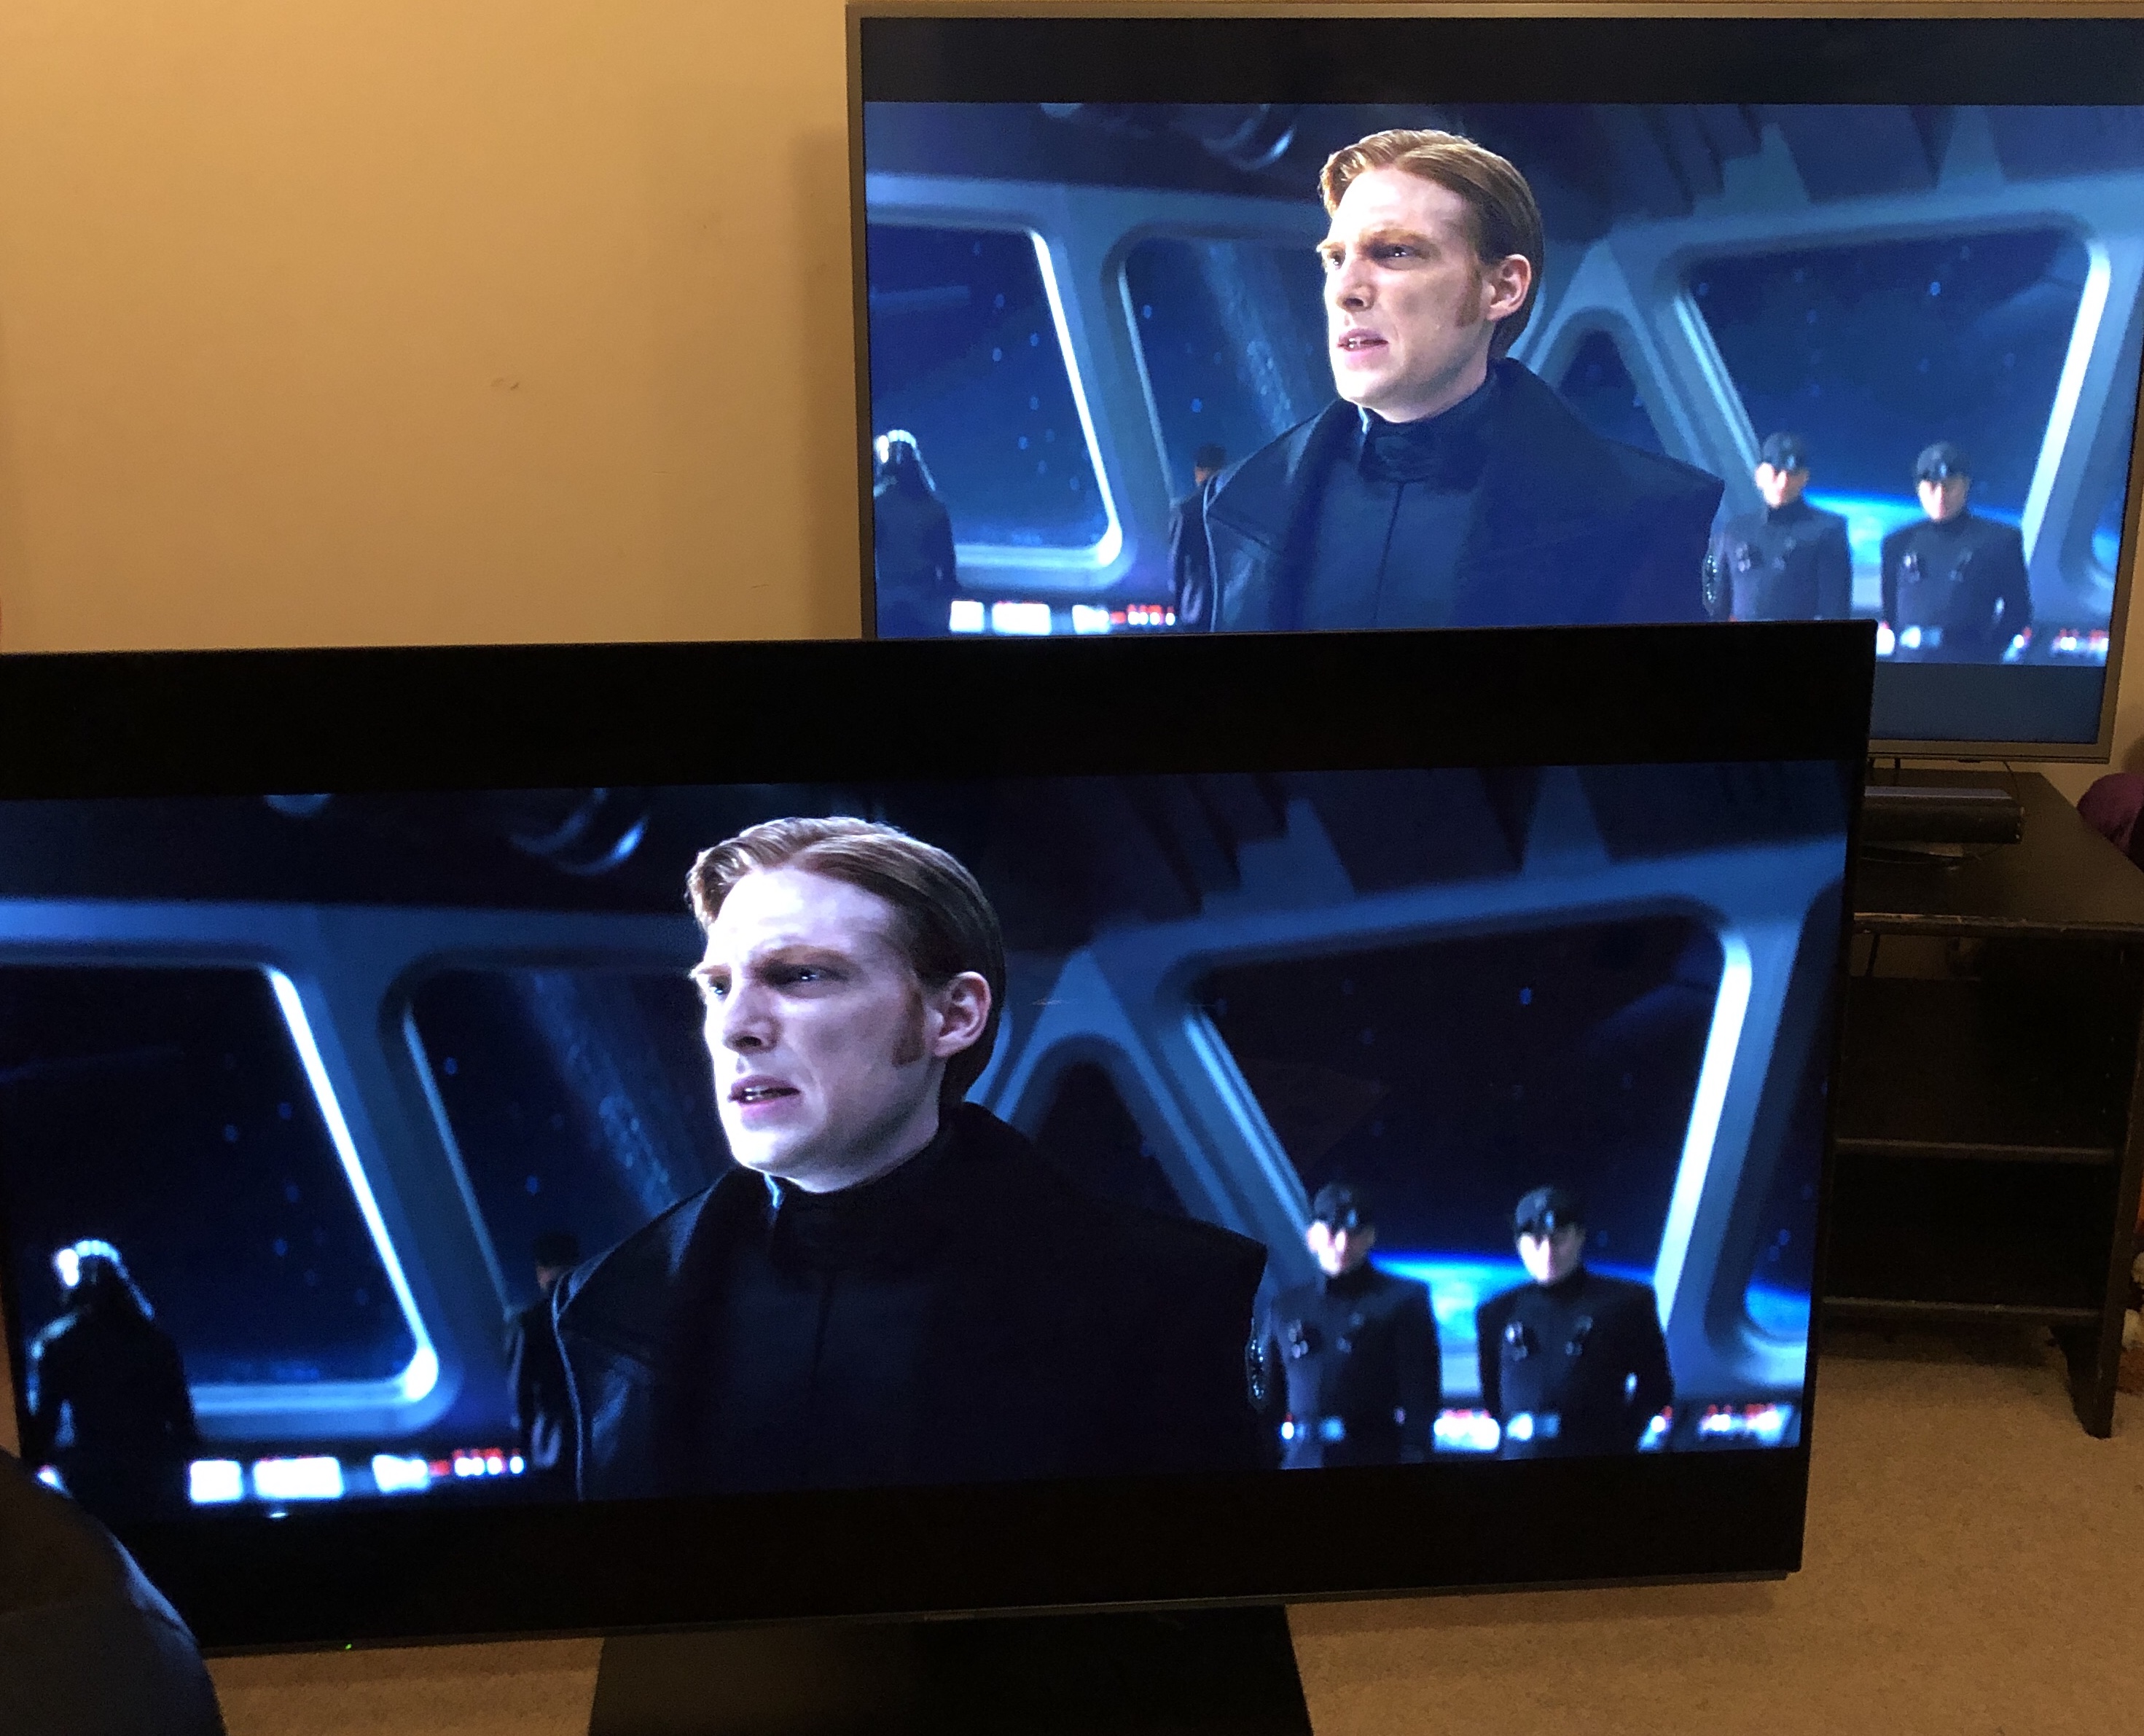 Two televisions showing the same frame from a Star Wars film, the one in the foreground has much higher contrast.